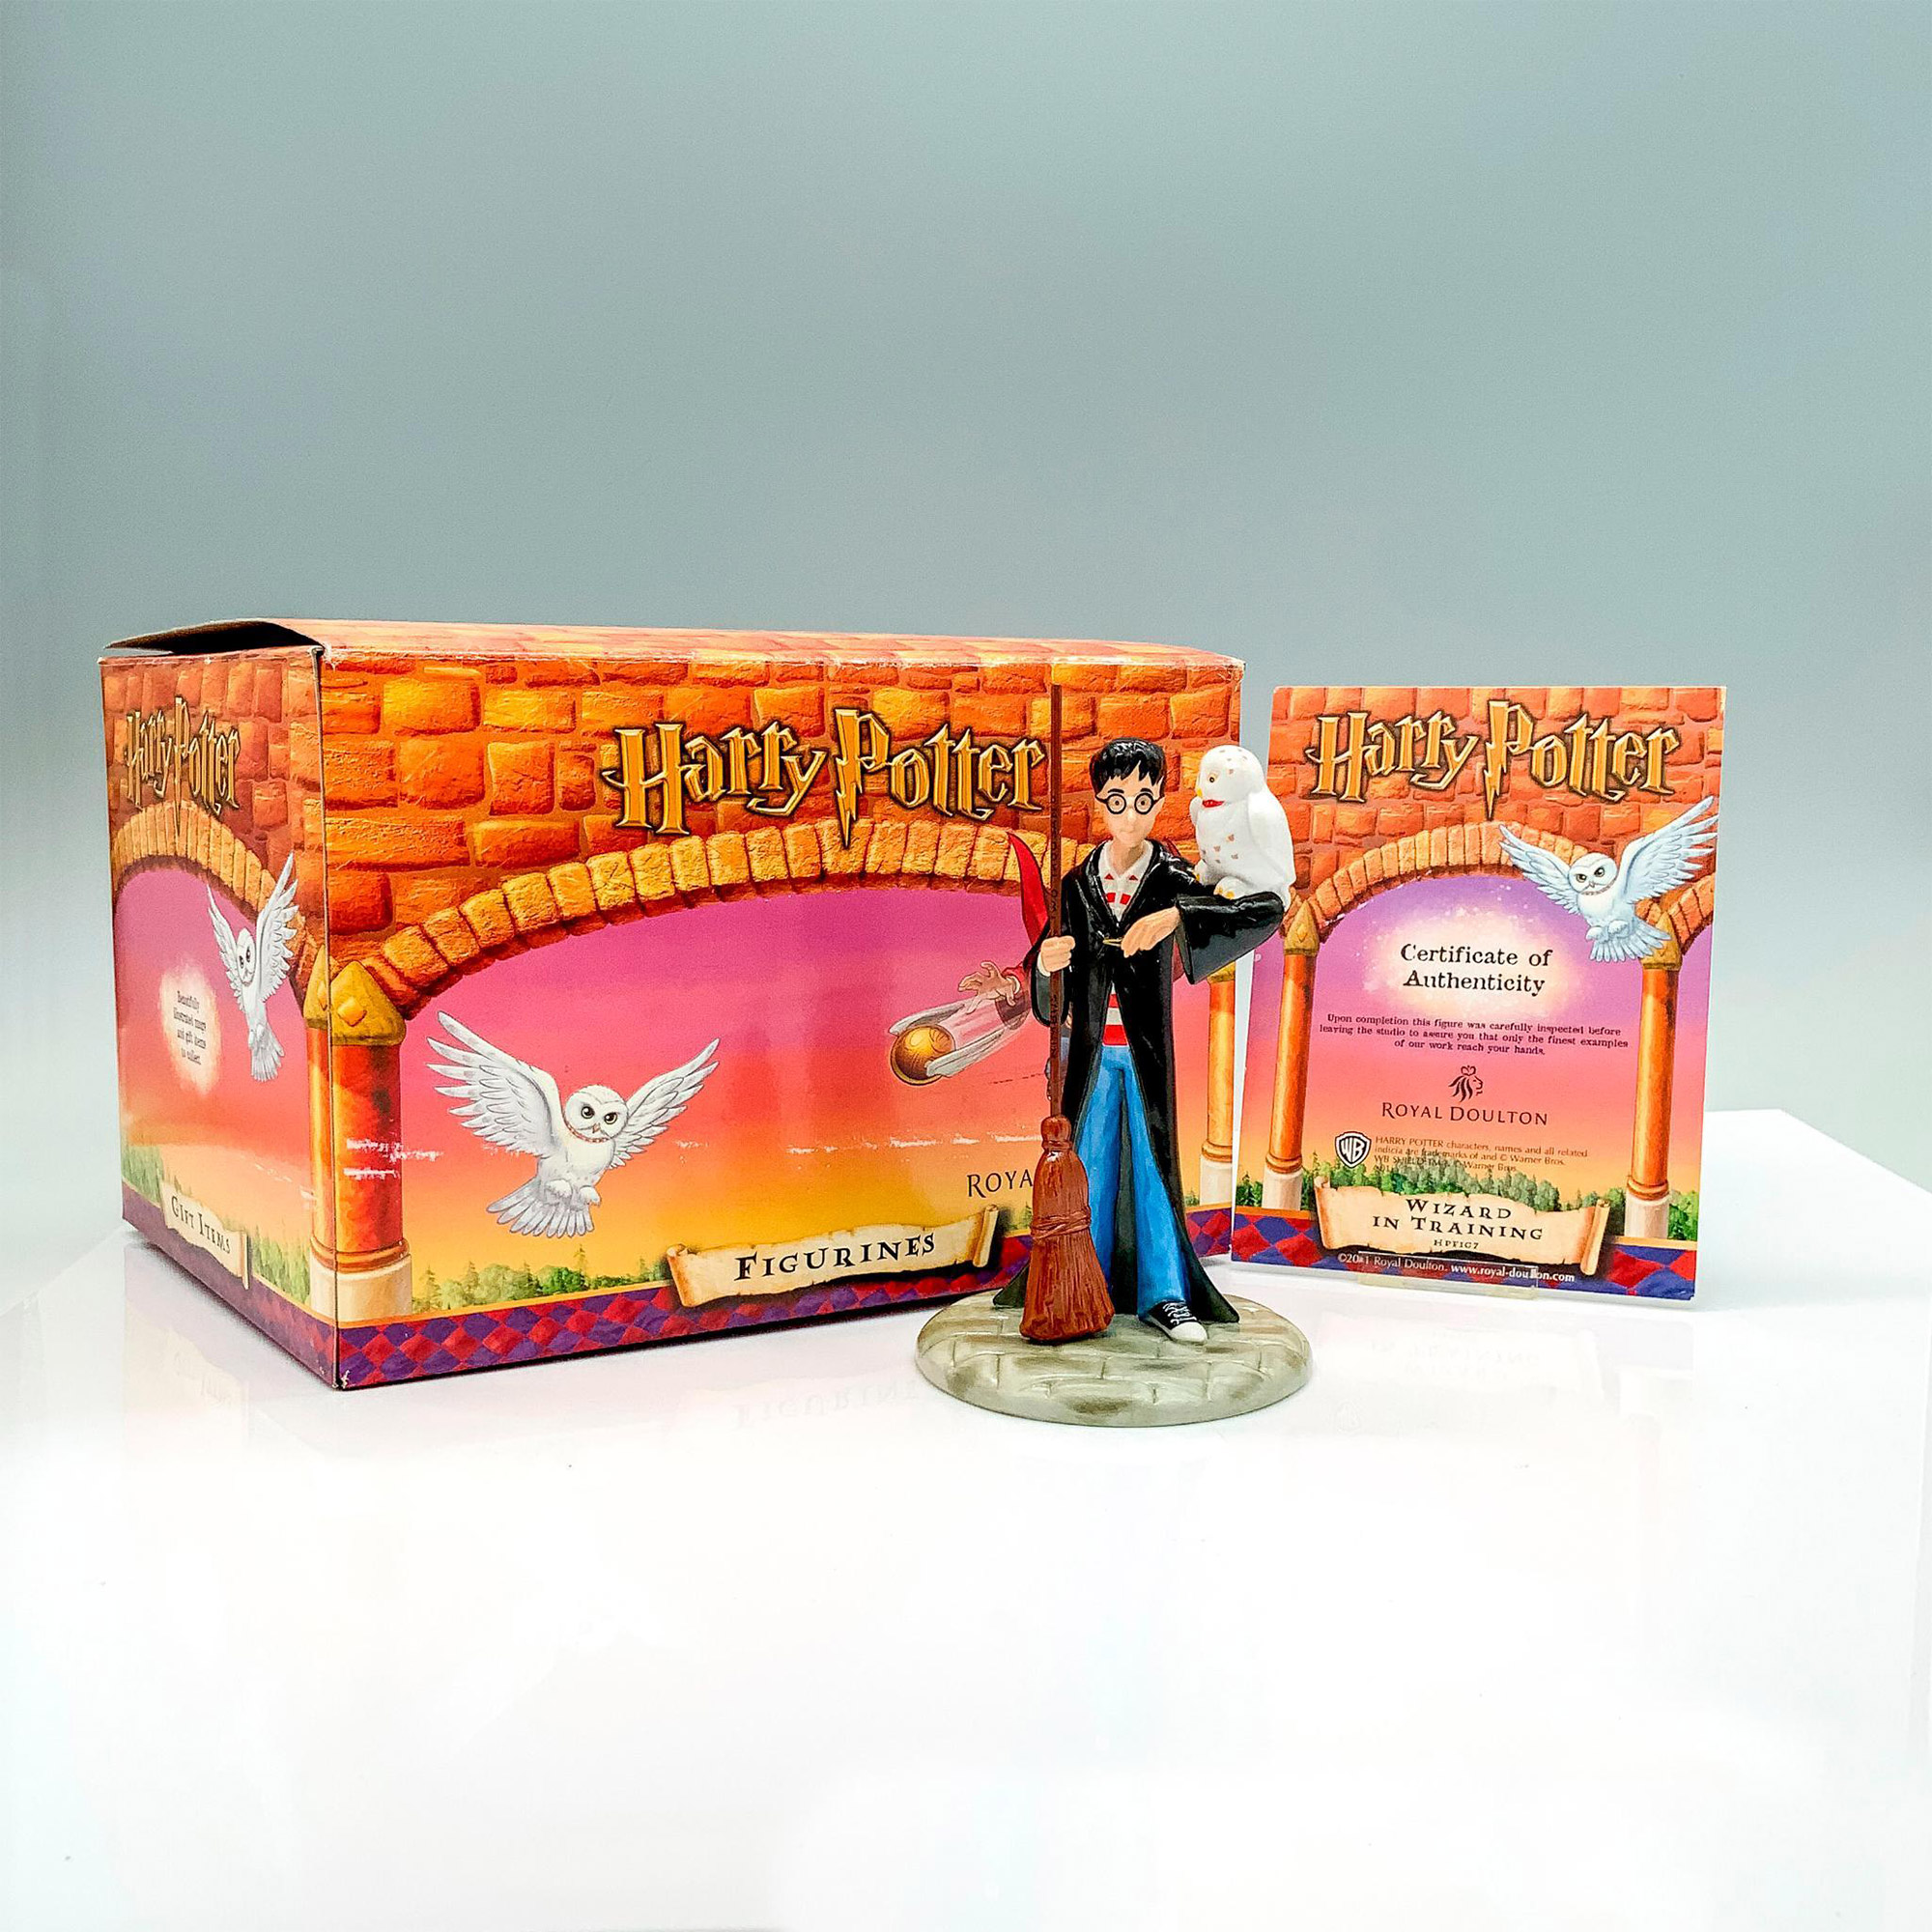 Royal Doulton Harry Potter Figurine, Wizard in Training - Image 4 of 4